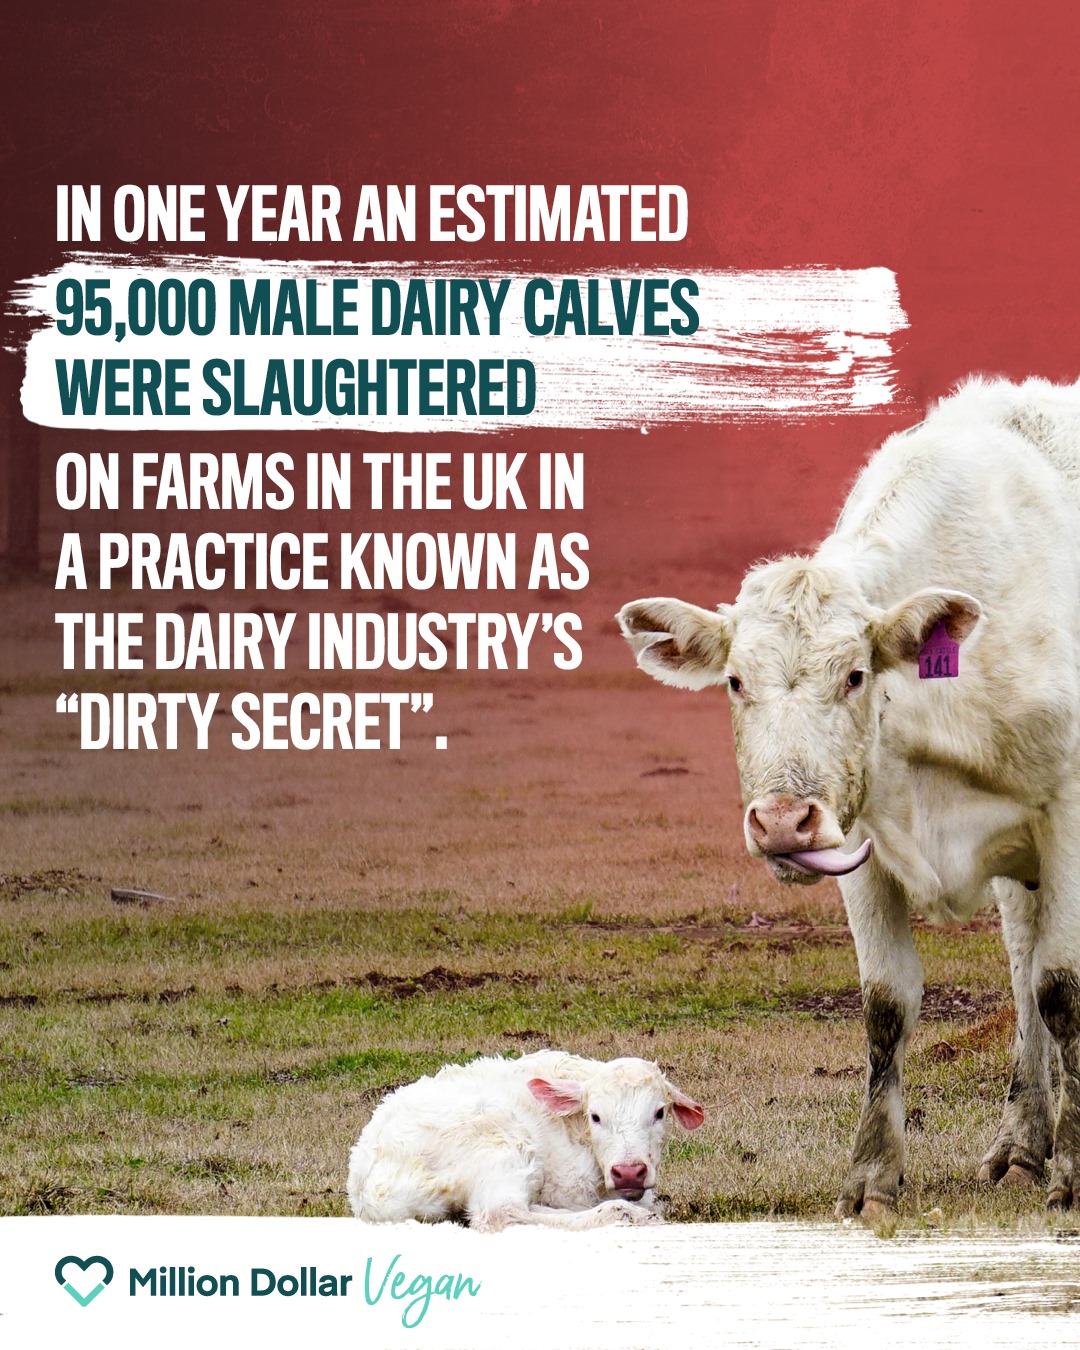 The dairy industry's dirty secret